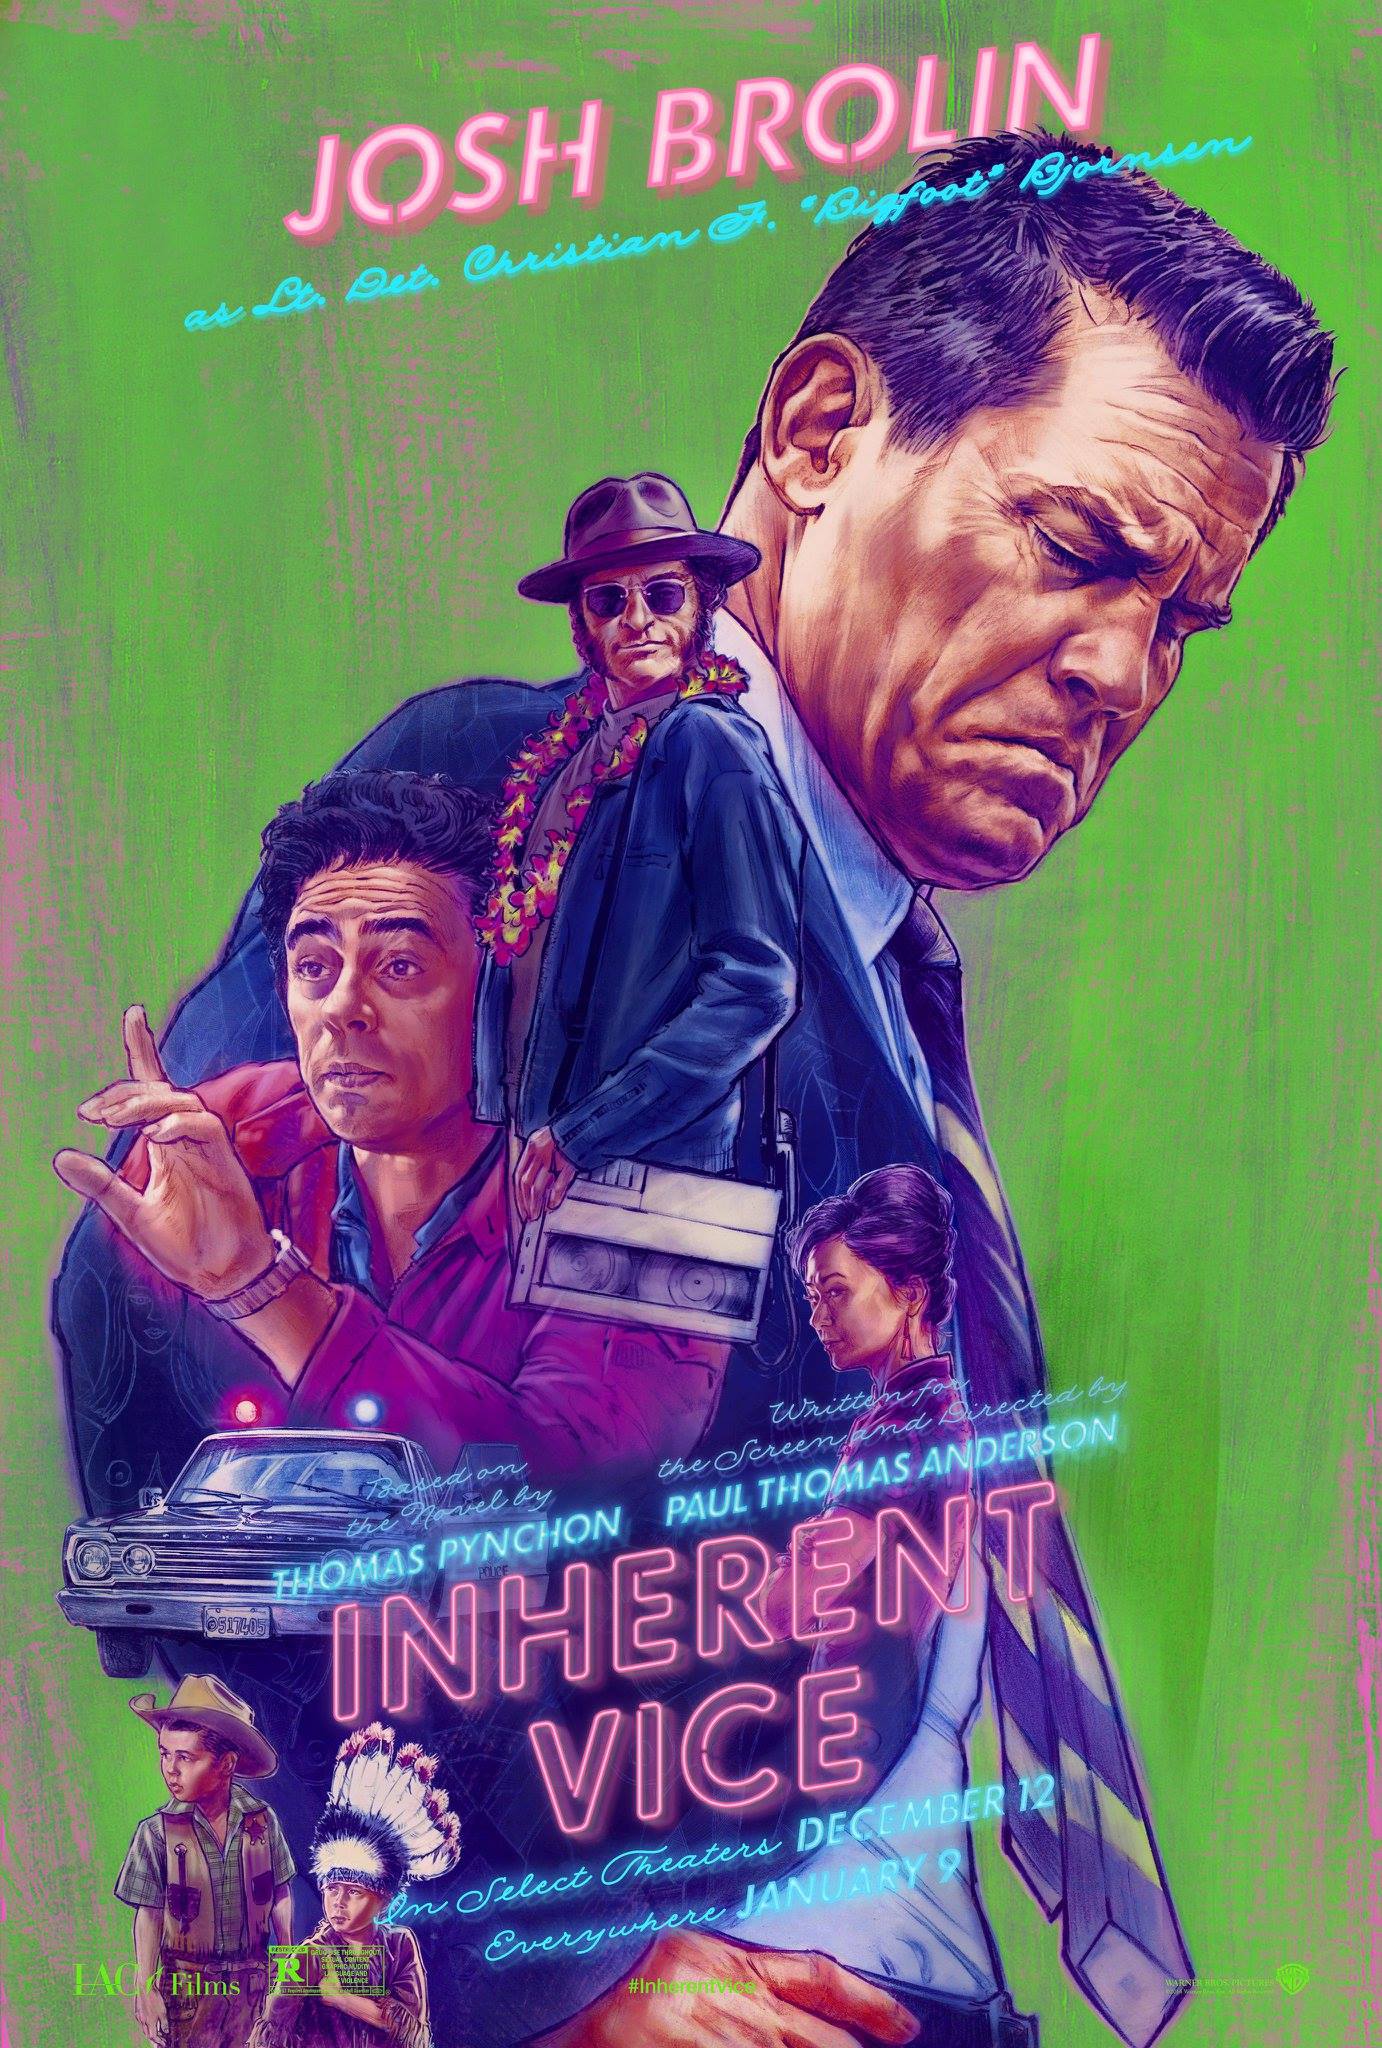 Meet The Ensemble Of Inherent Vice With Full Set Of Character Posters And Teasers